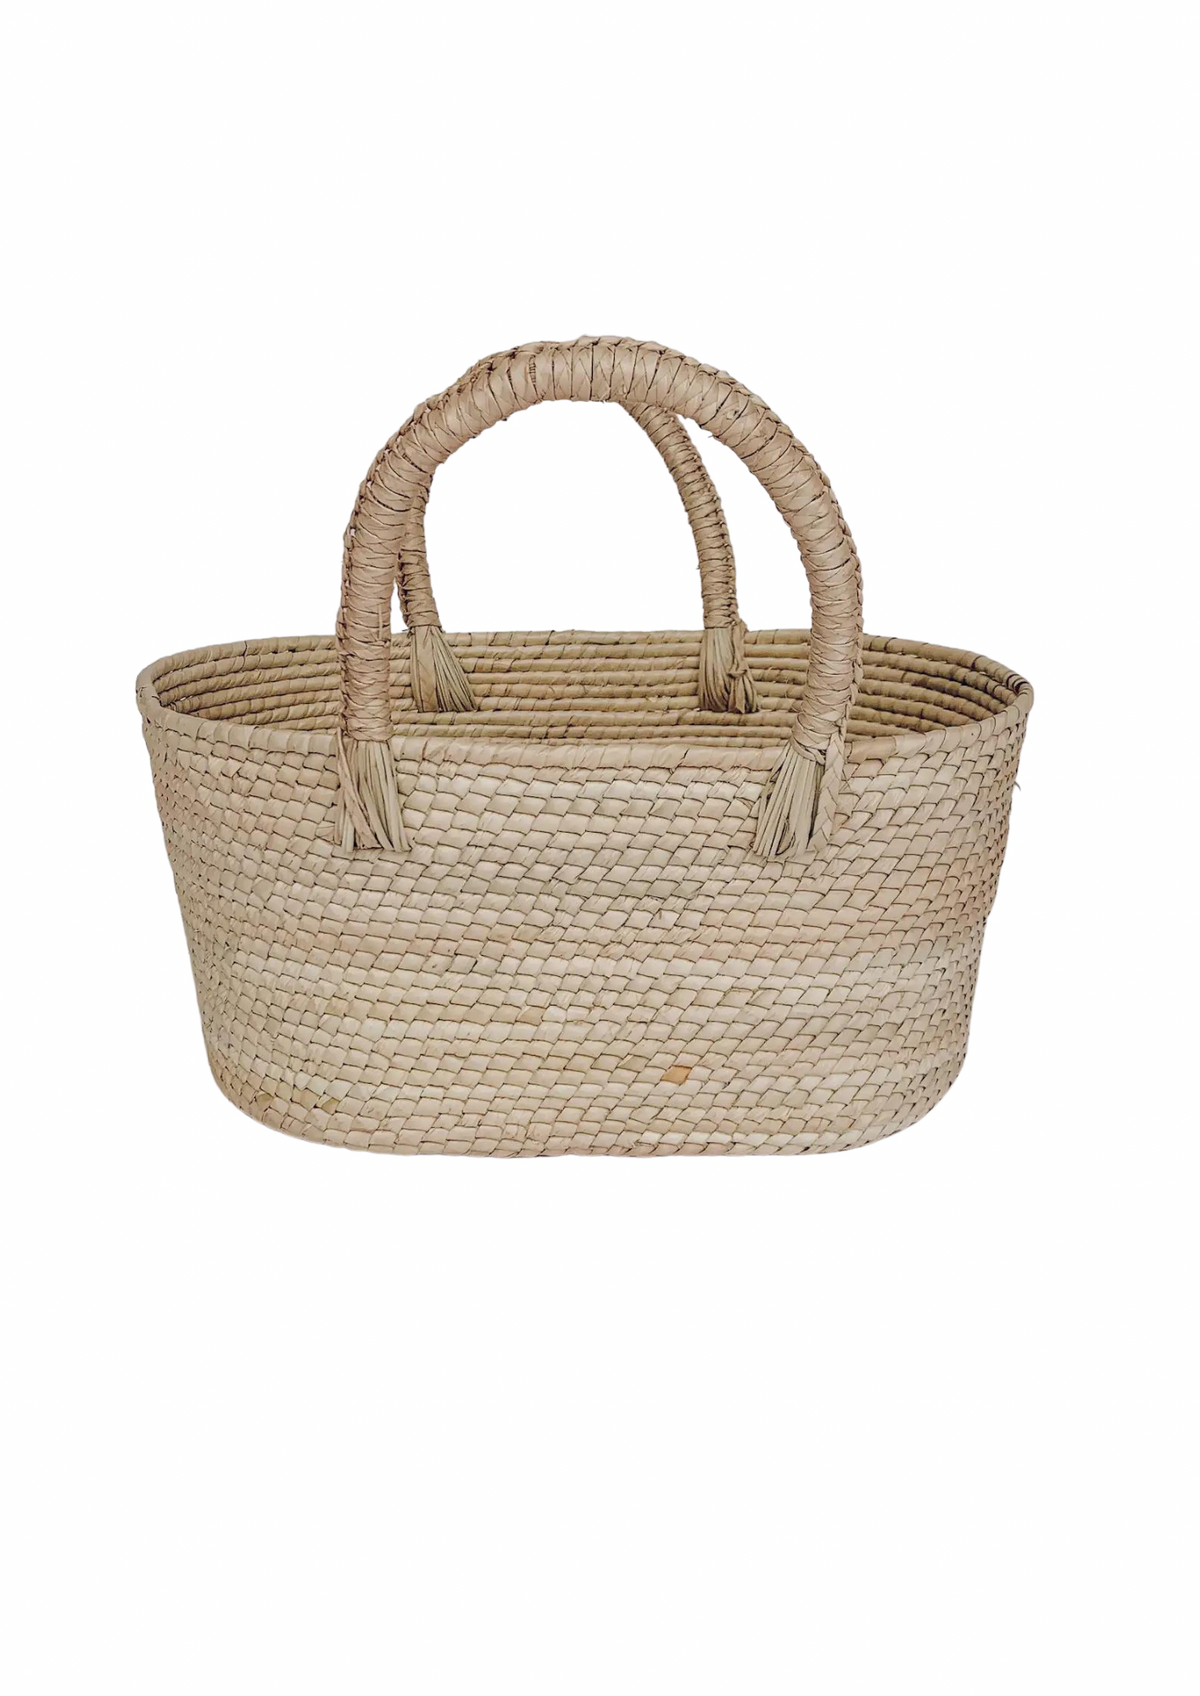 Sunset Straw Basket With Handles